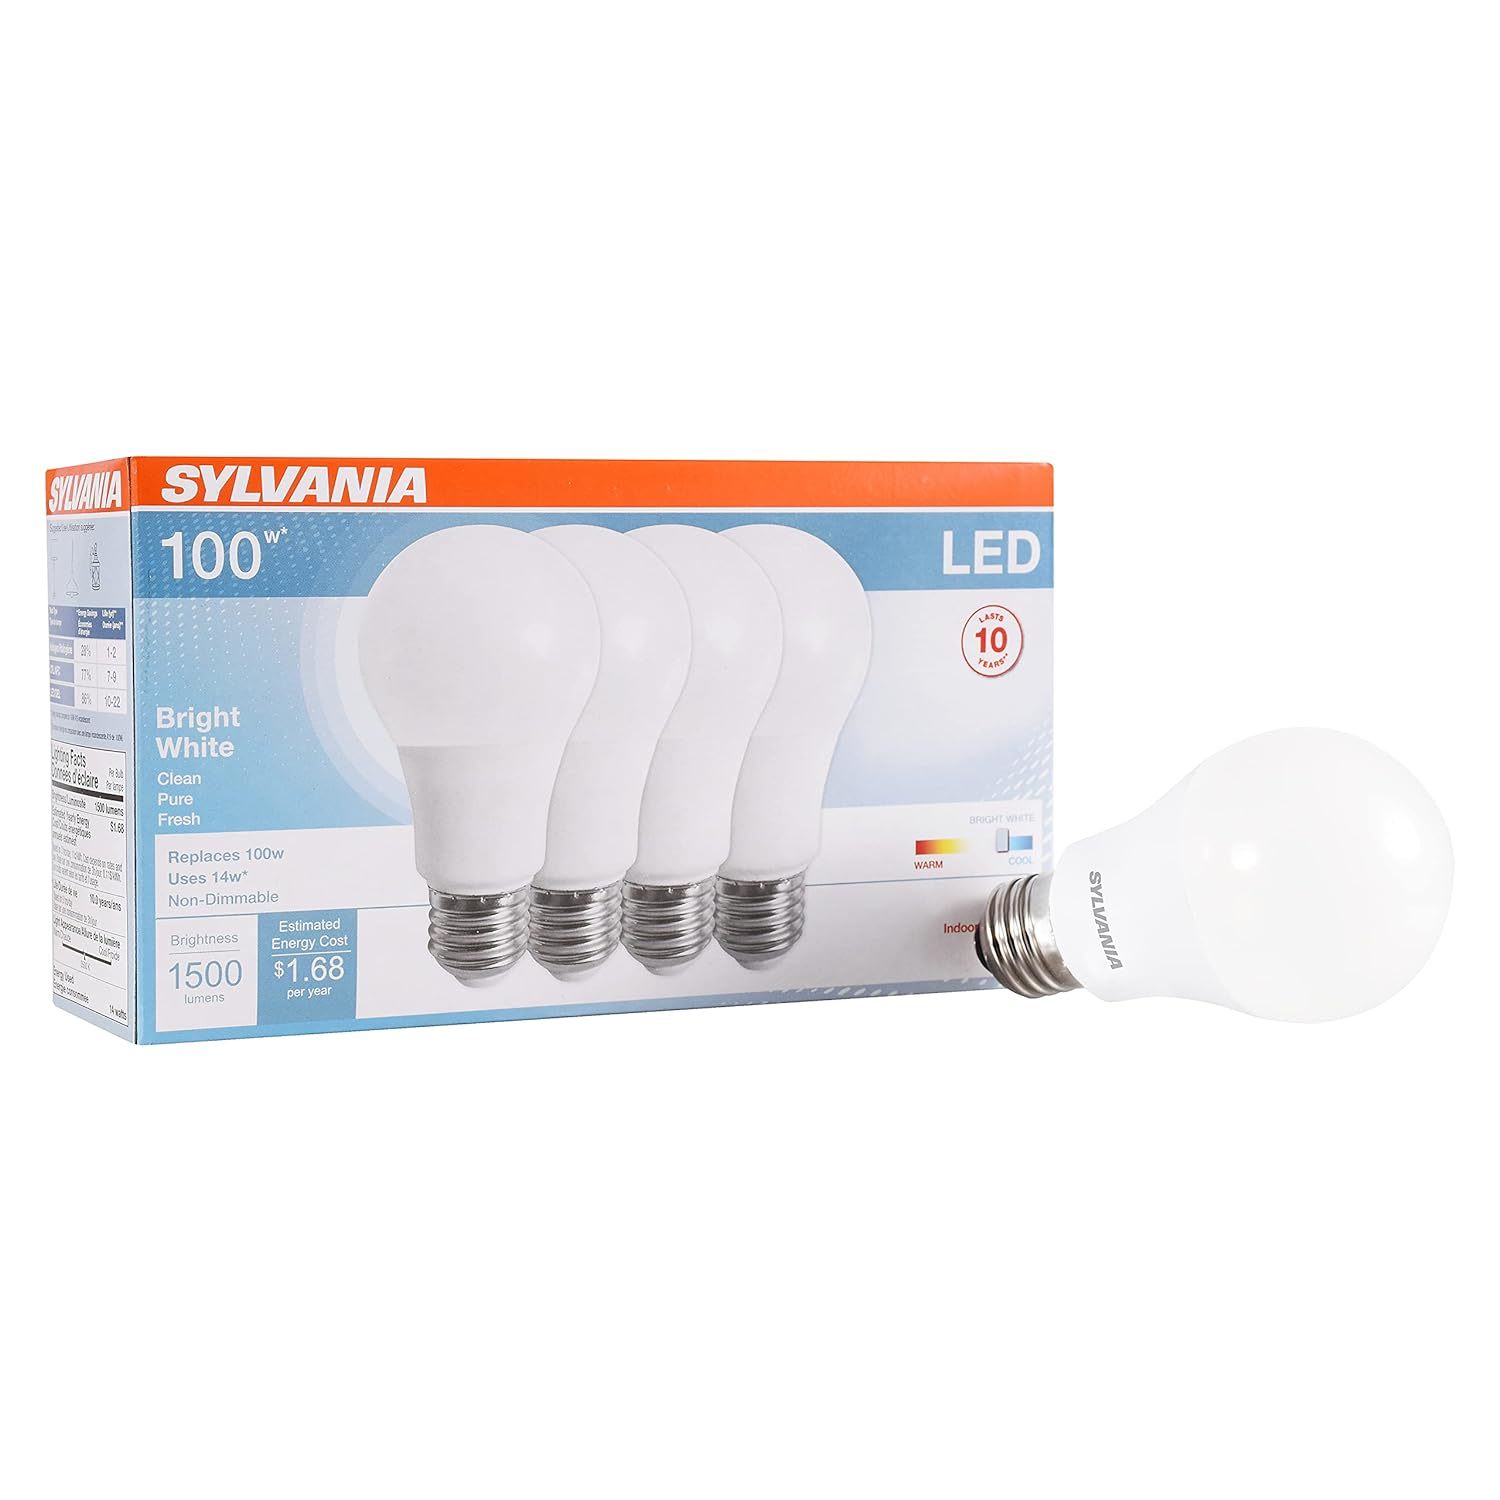 SYLVANIA LED Light Bulb, 100W Equivalent A19, Efficient 14W, Frosted Finish, 150 - $36.09